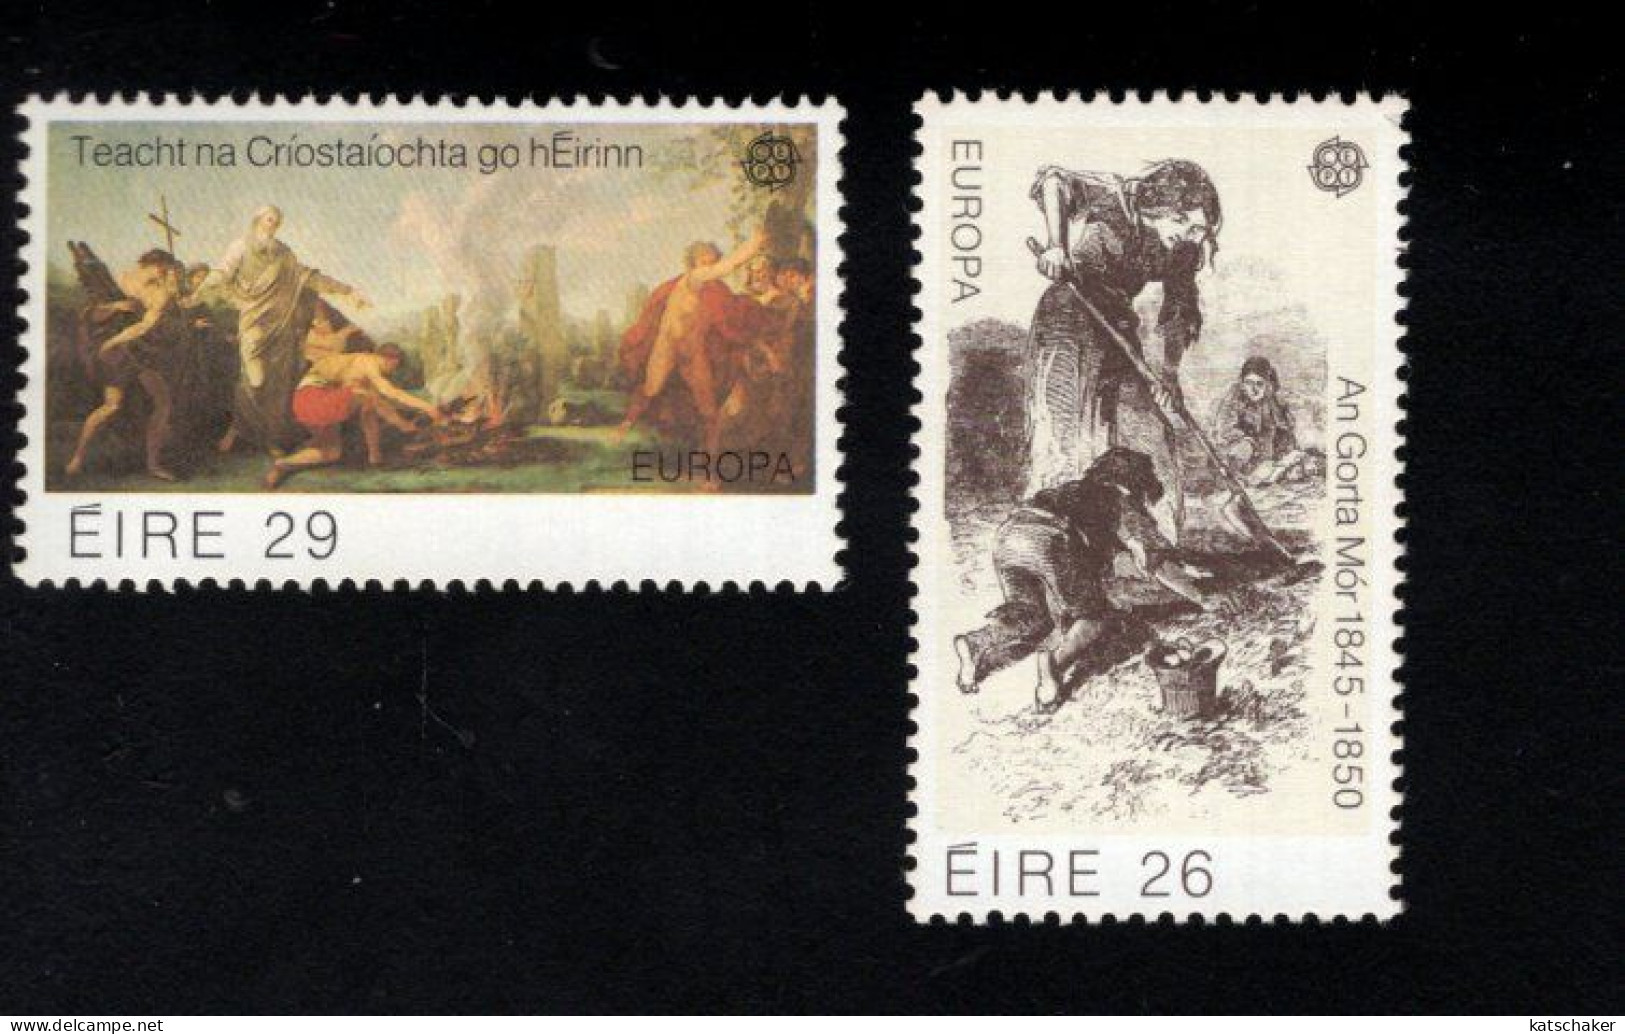 1999552253 1982  SCOTT 519 520 (XX) POSTFRIS  MINT NEVER HINGED - EUROPA ISSUE - GREAT FAMINE - CONVERSION OF IRELAND - Unused Stamps